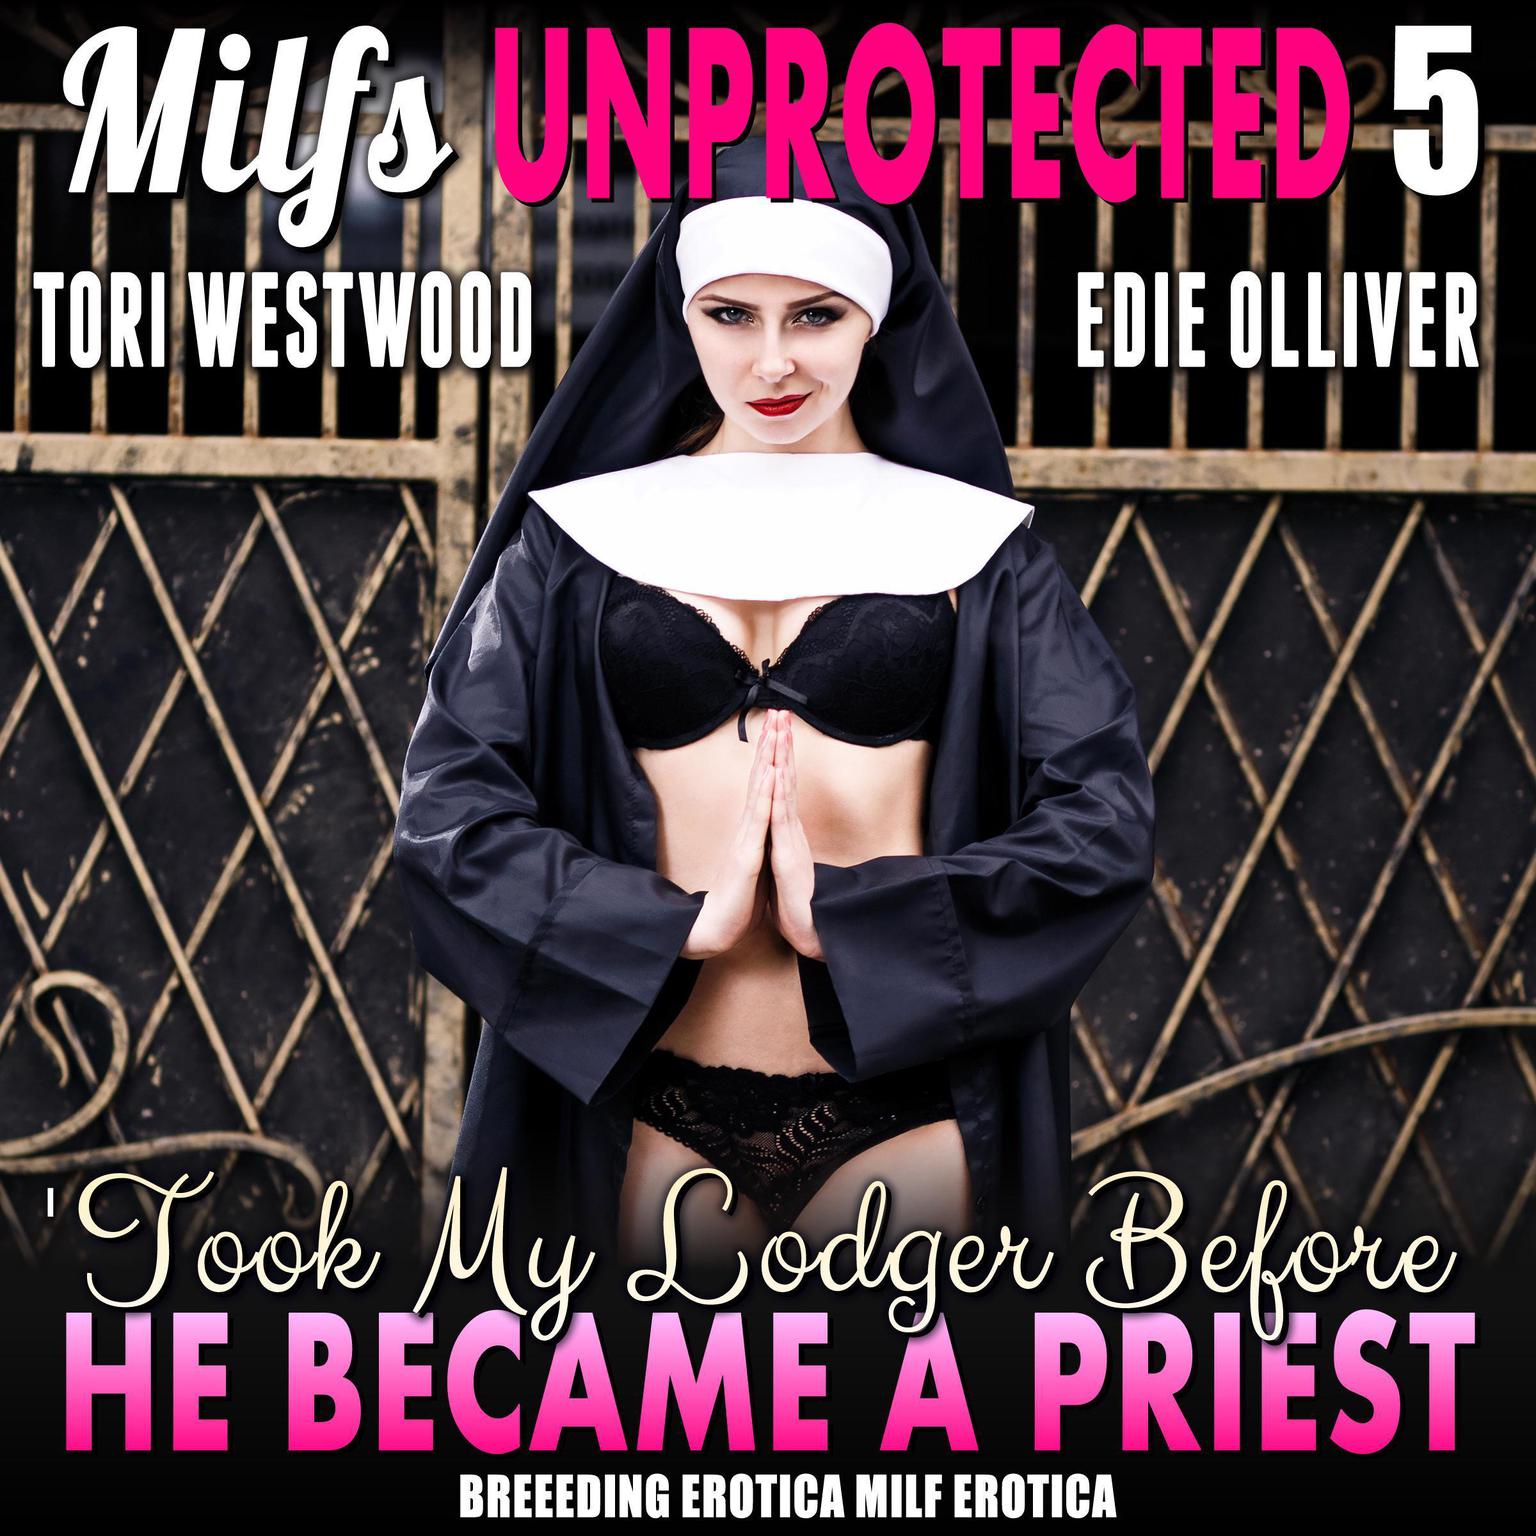 I Took My Lodger Before He Became A Priest : Milfs Unprotected 5 (Breeding Erotica MILF Erotica) Audiobook, by Tori Westwood